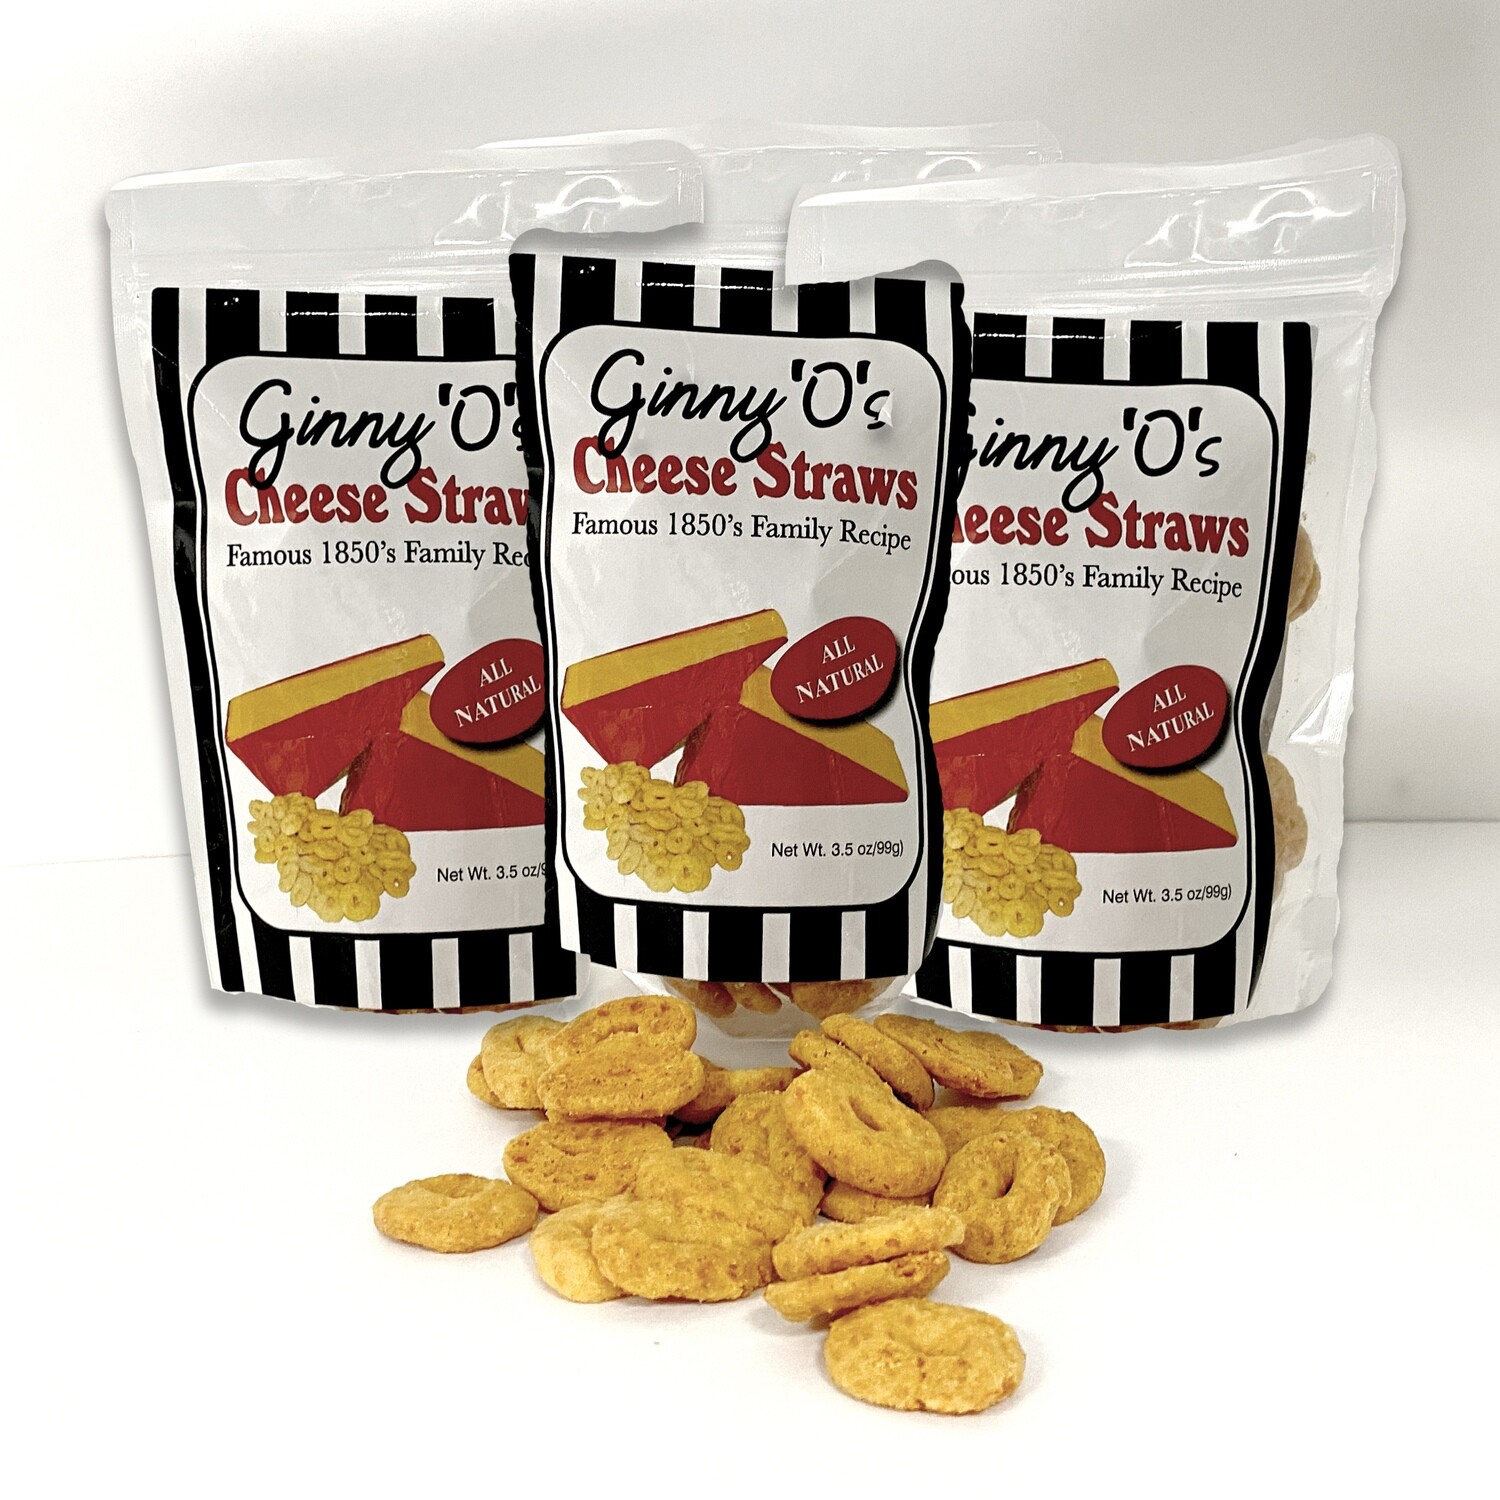 3 Packages of 3.5 oz. Original Ginny O’s Cheese Straws